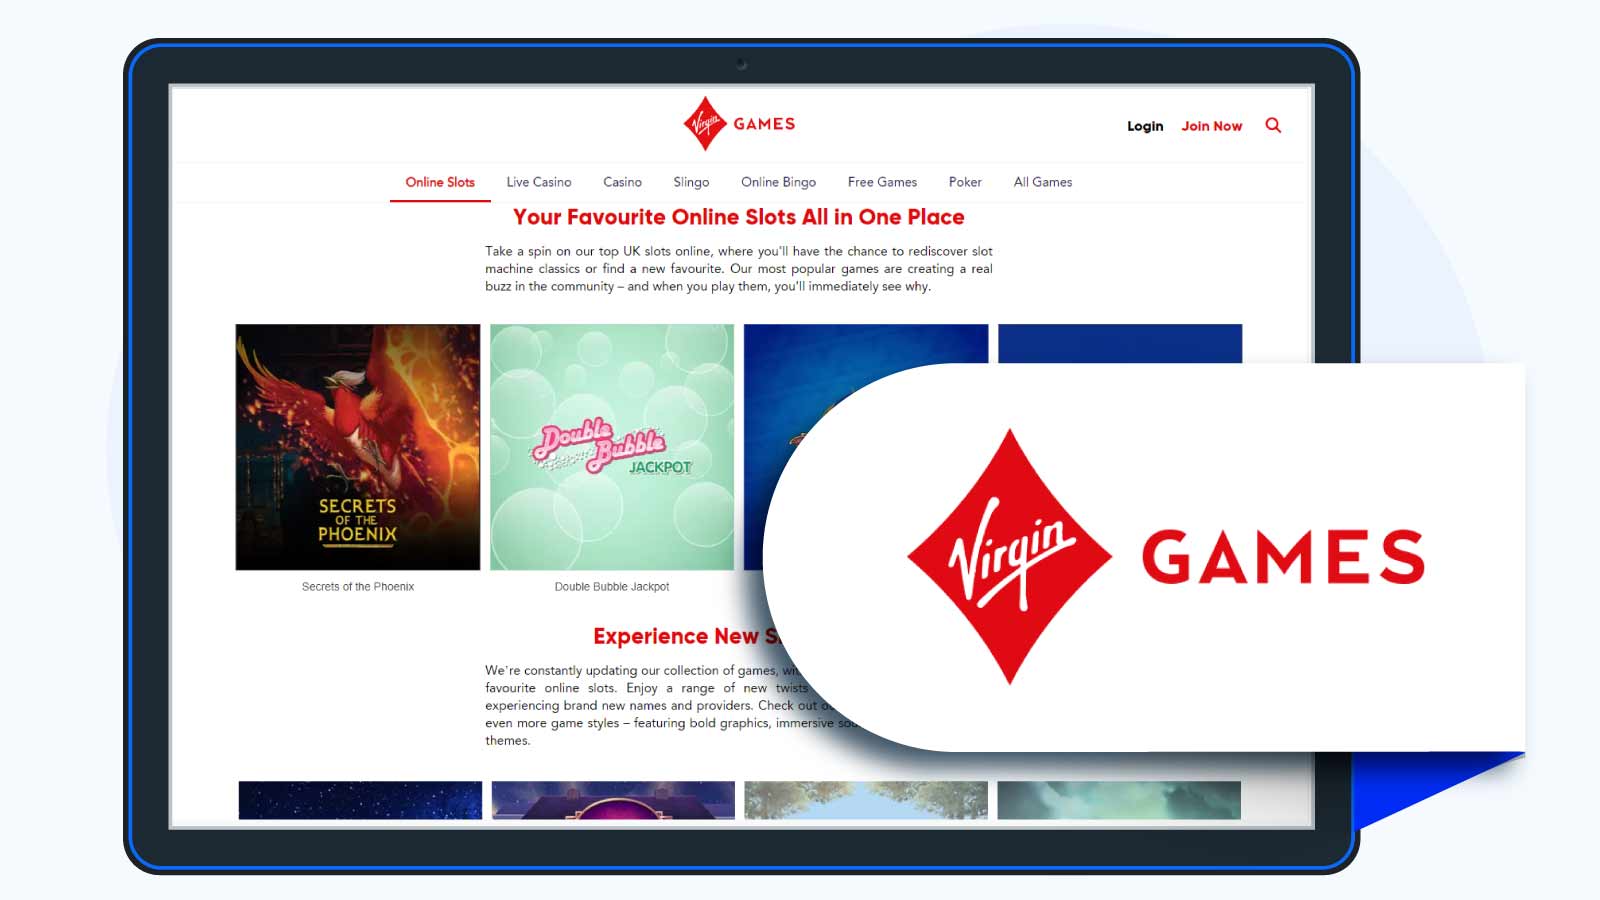 Virgin Games – Best Playtech Casino Site for Fast Withdrawals